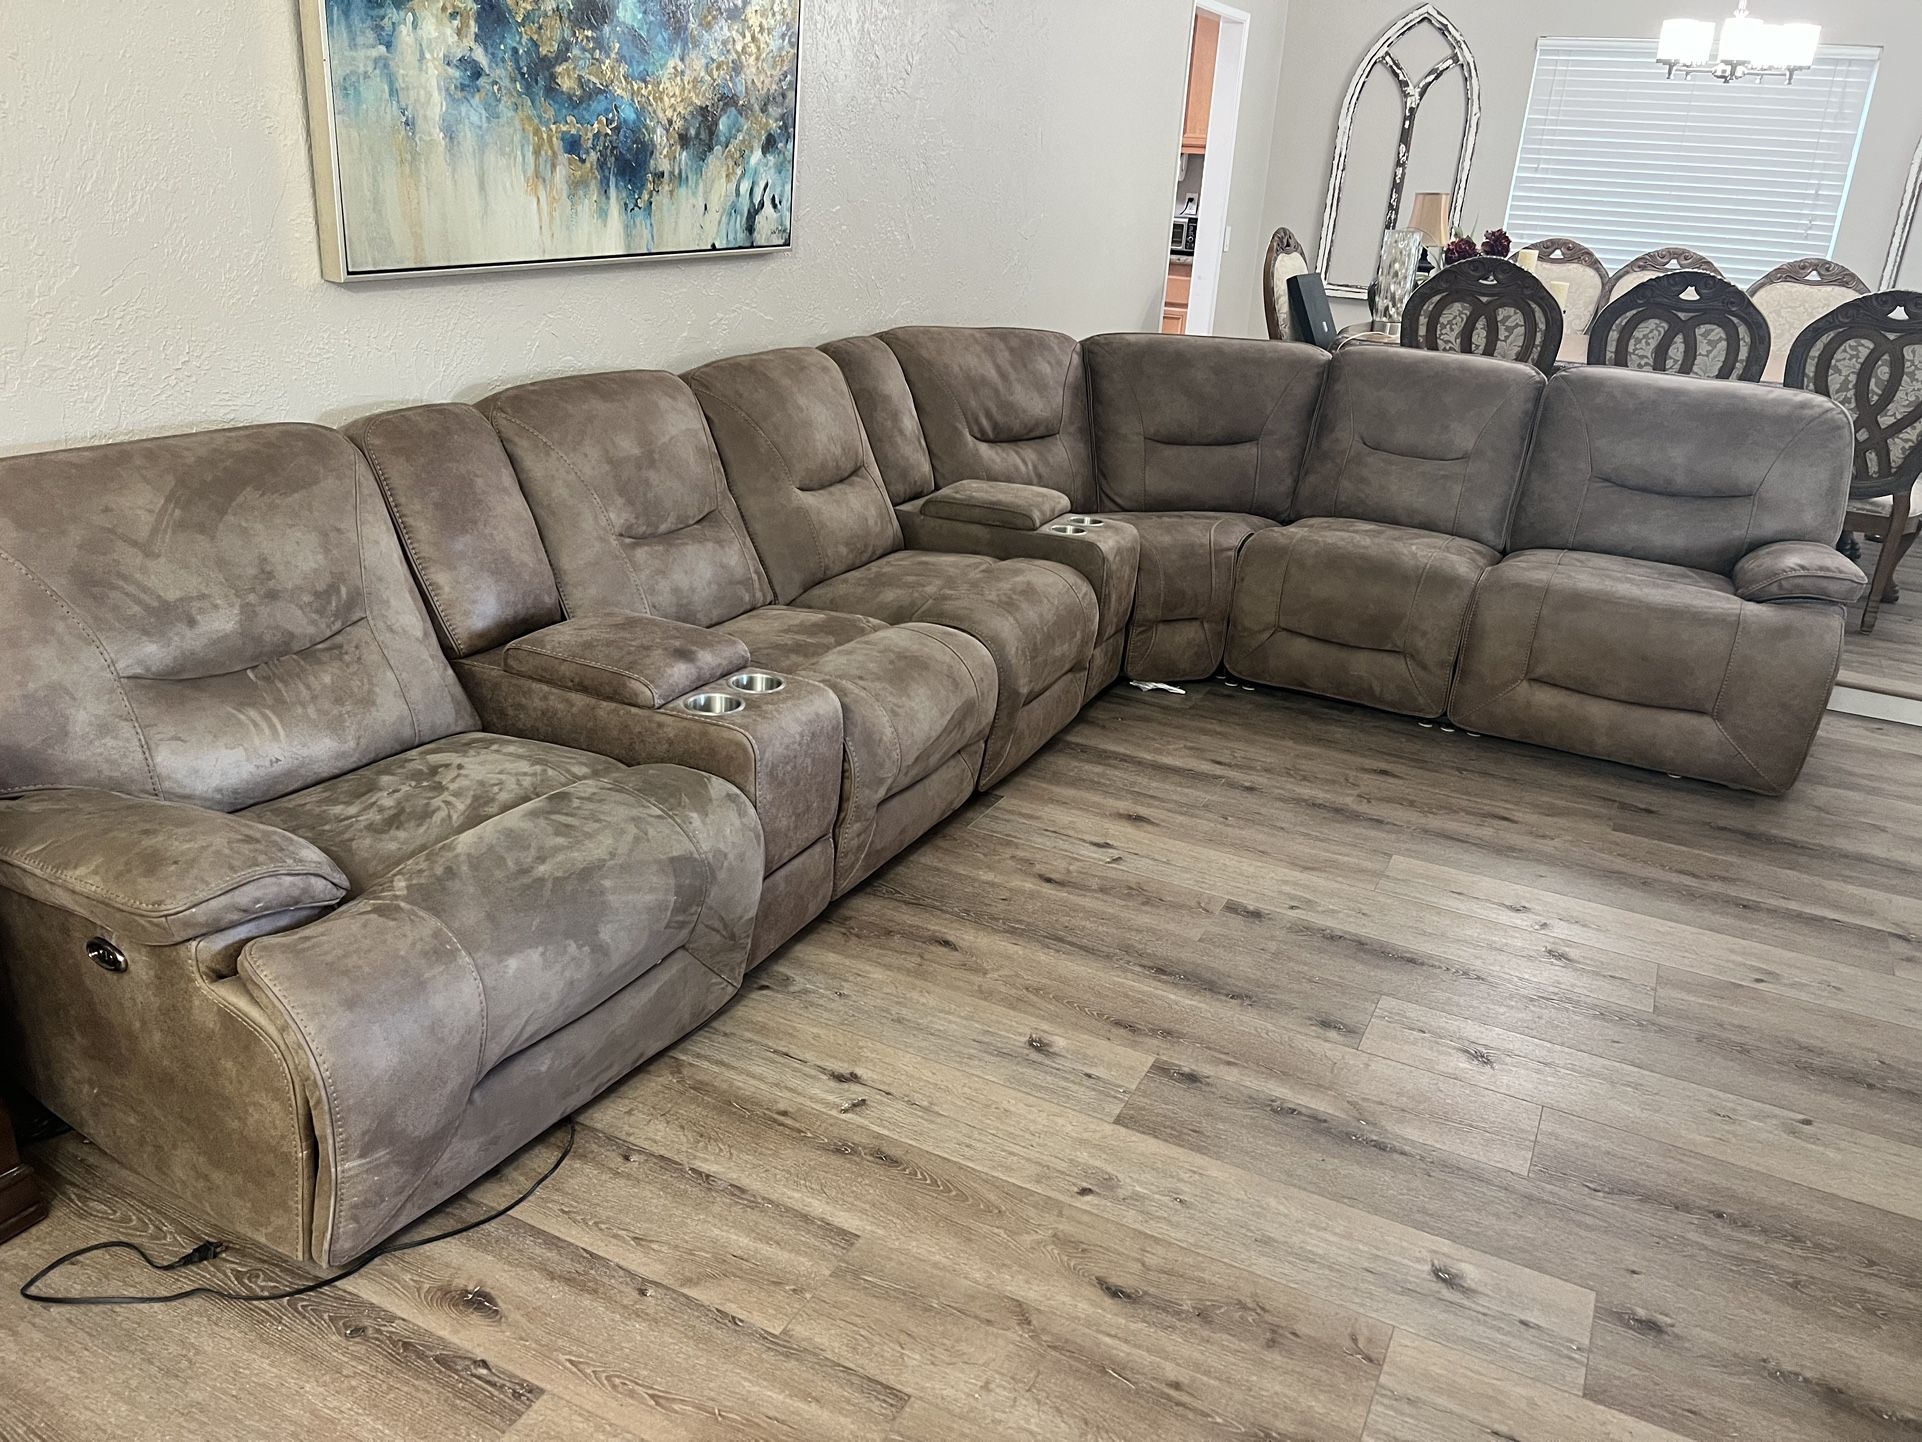 Large Brown Sectional With Recliners 